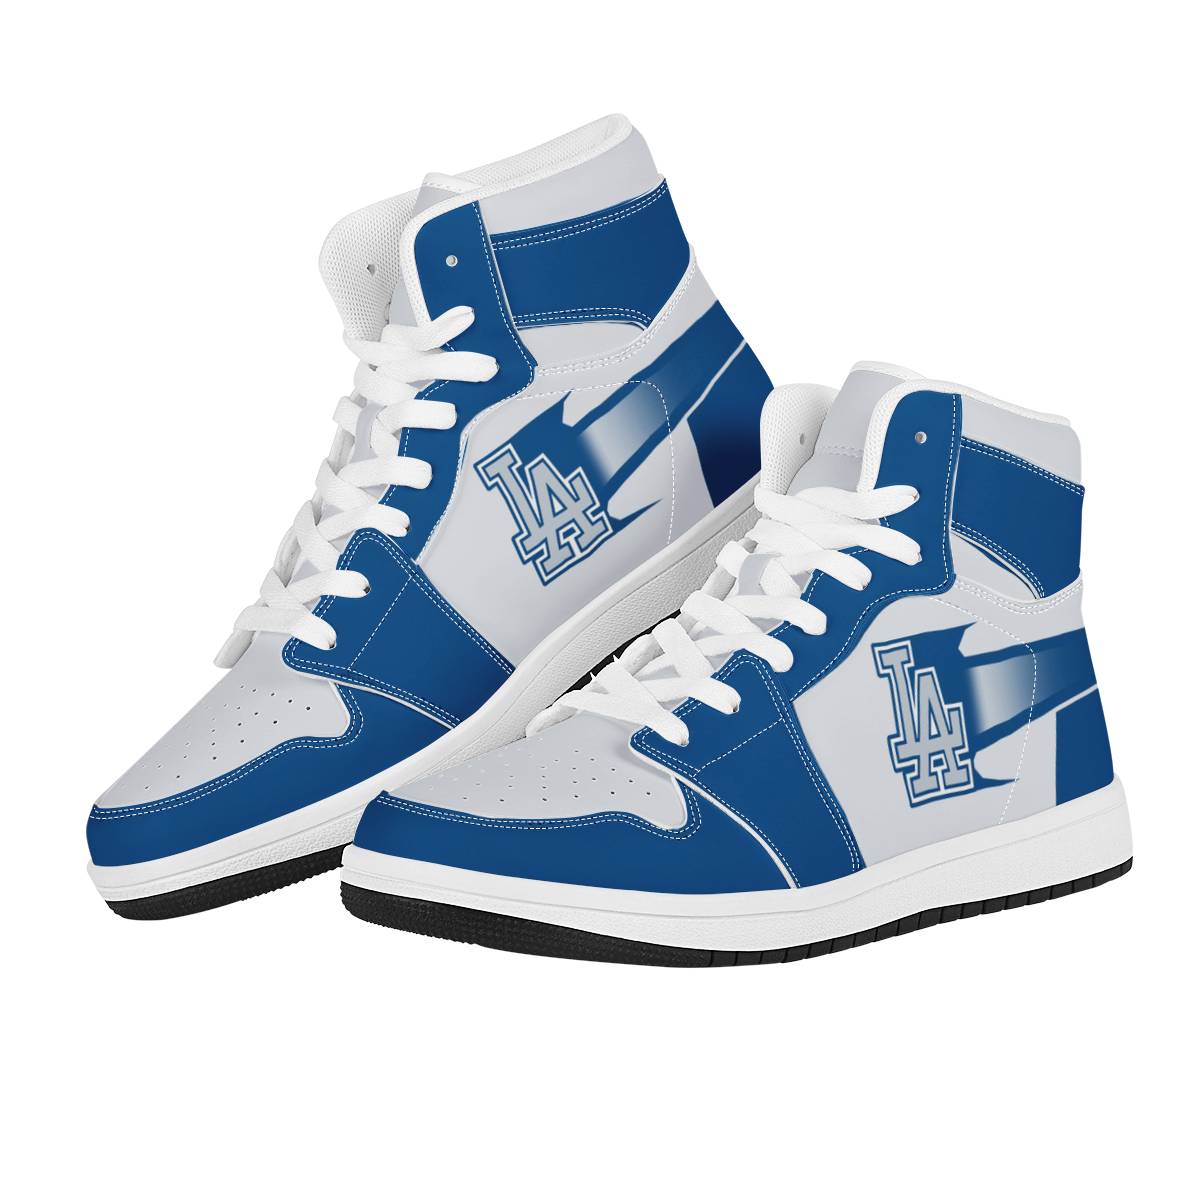 Men's Dodgers AJ High Top Leather Sneakers 002